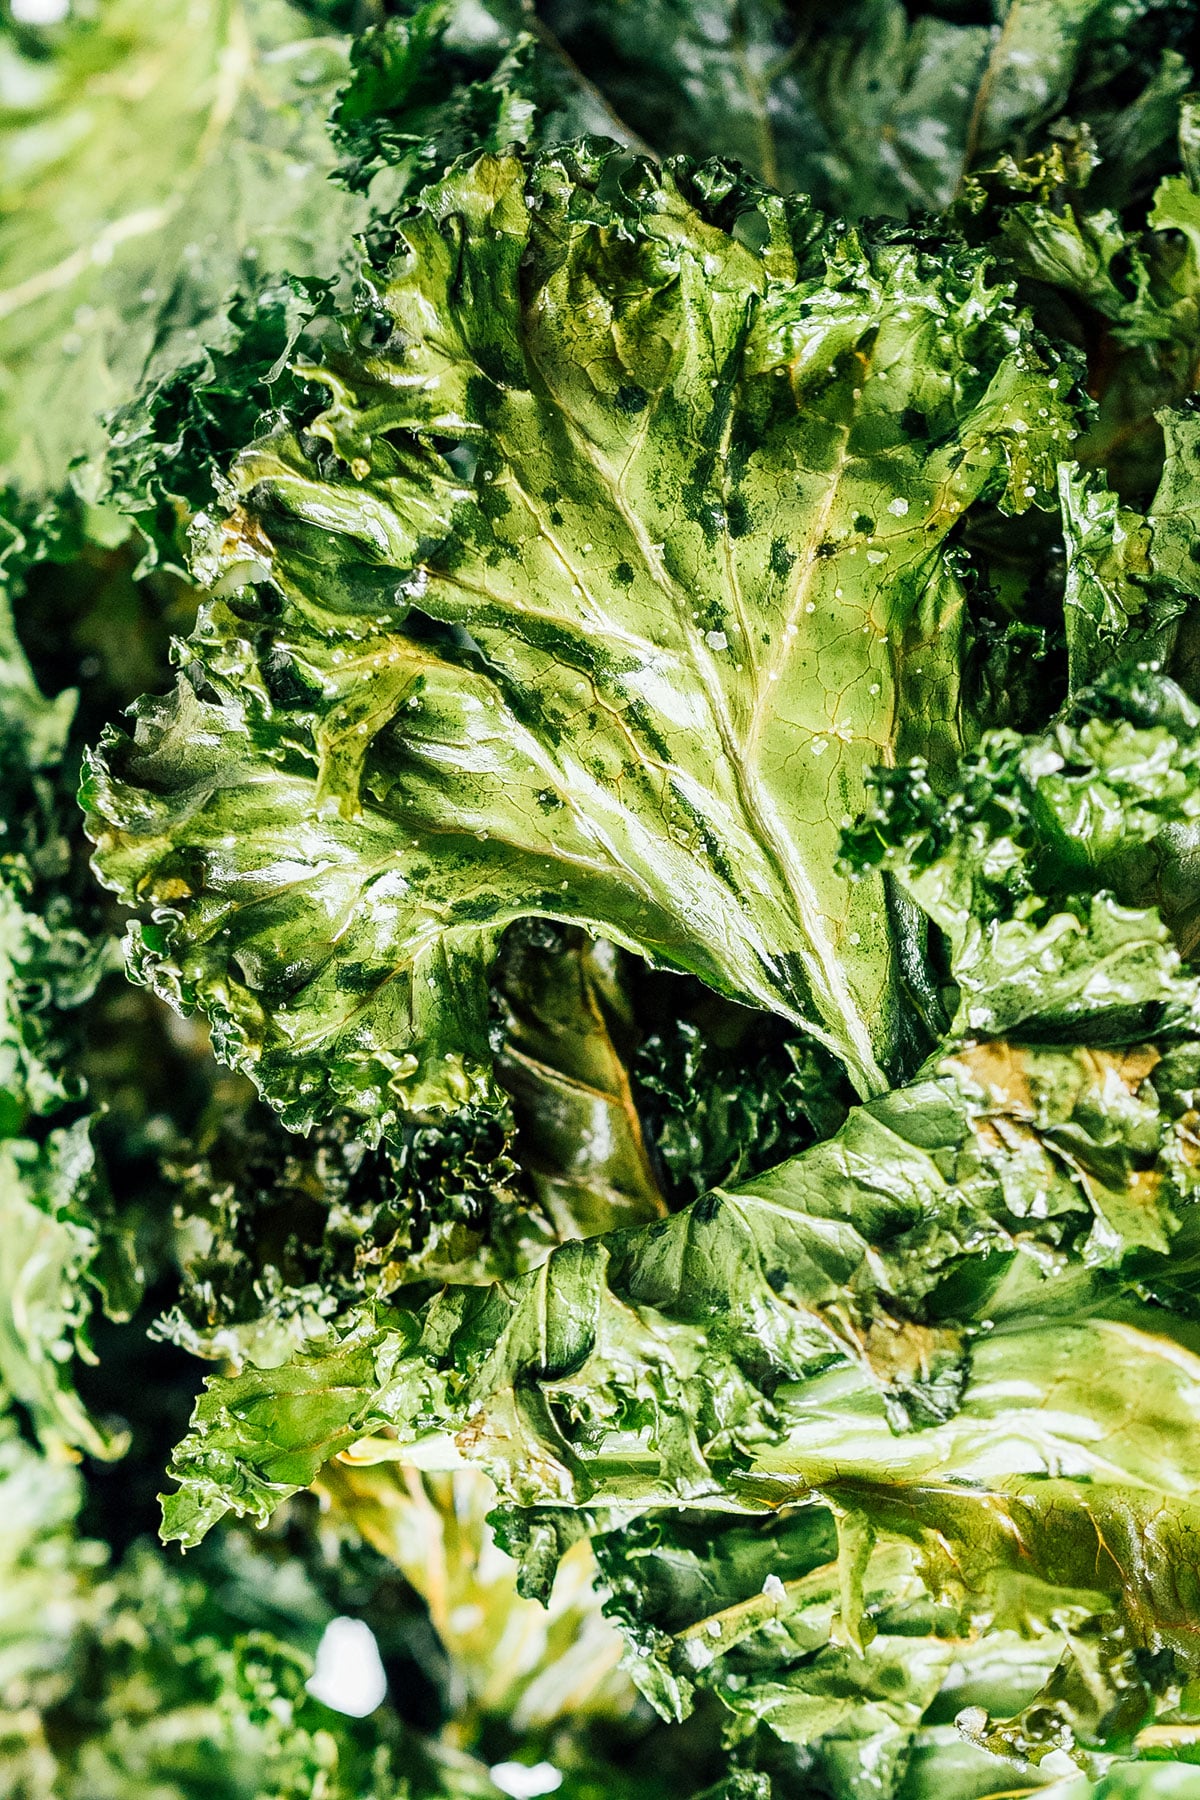 Close up photo of kale chips